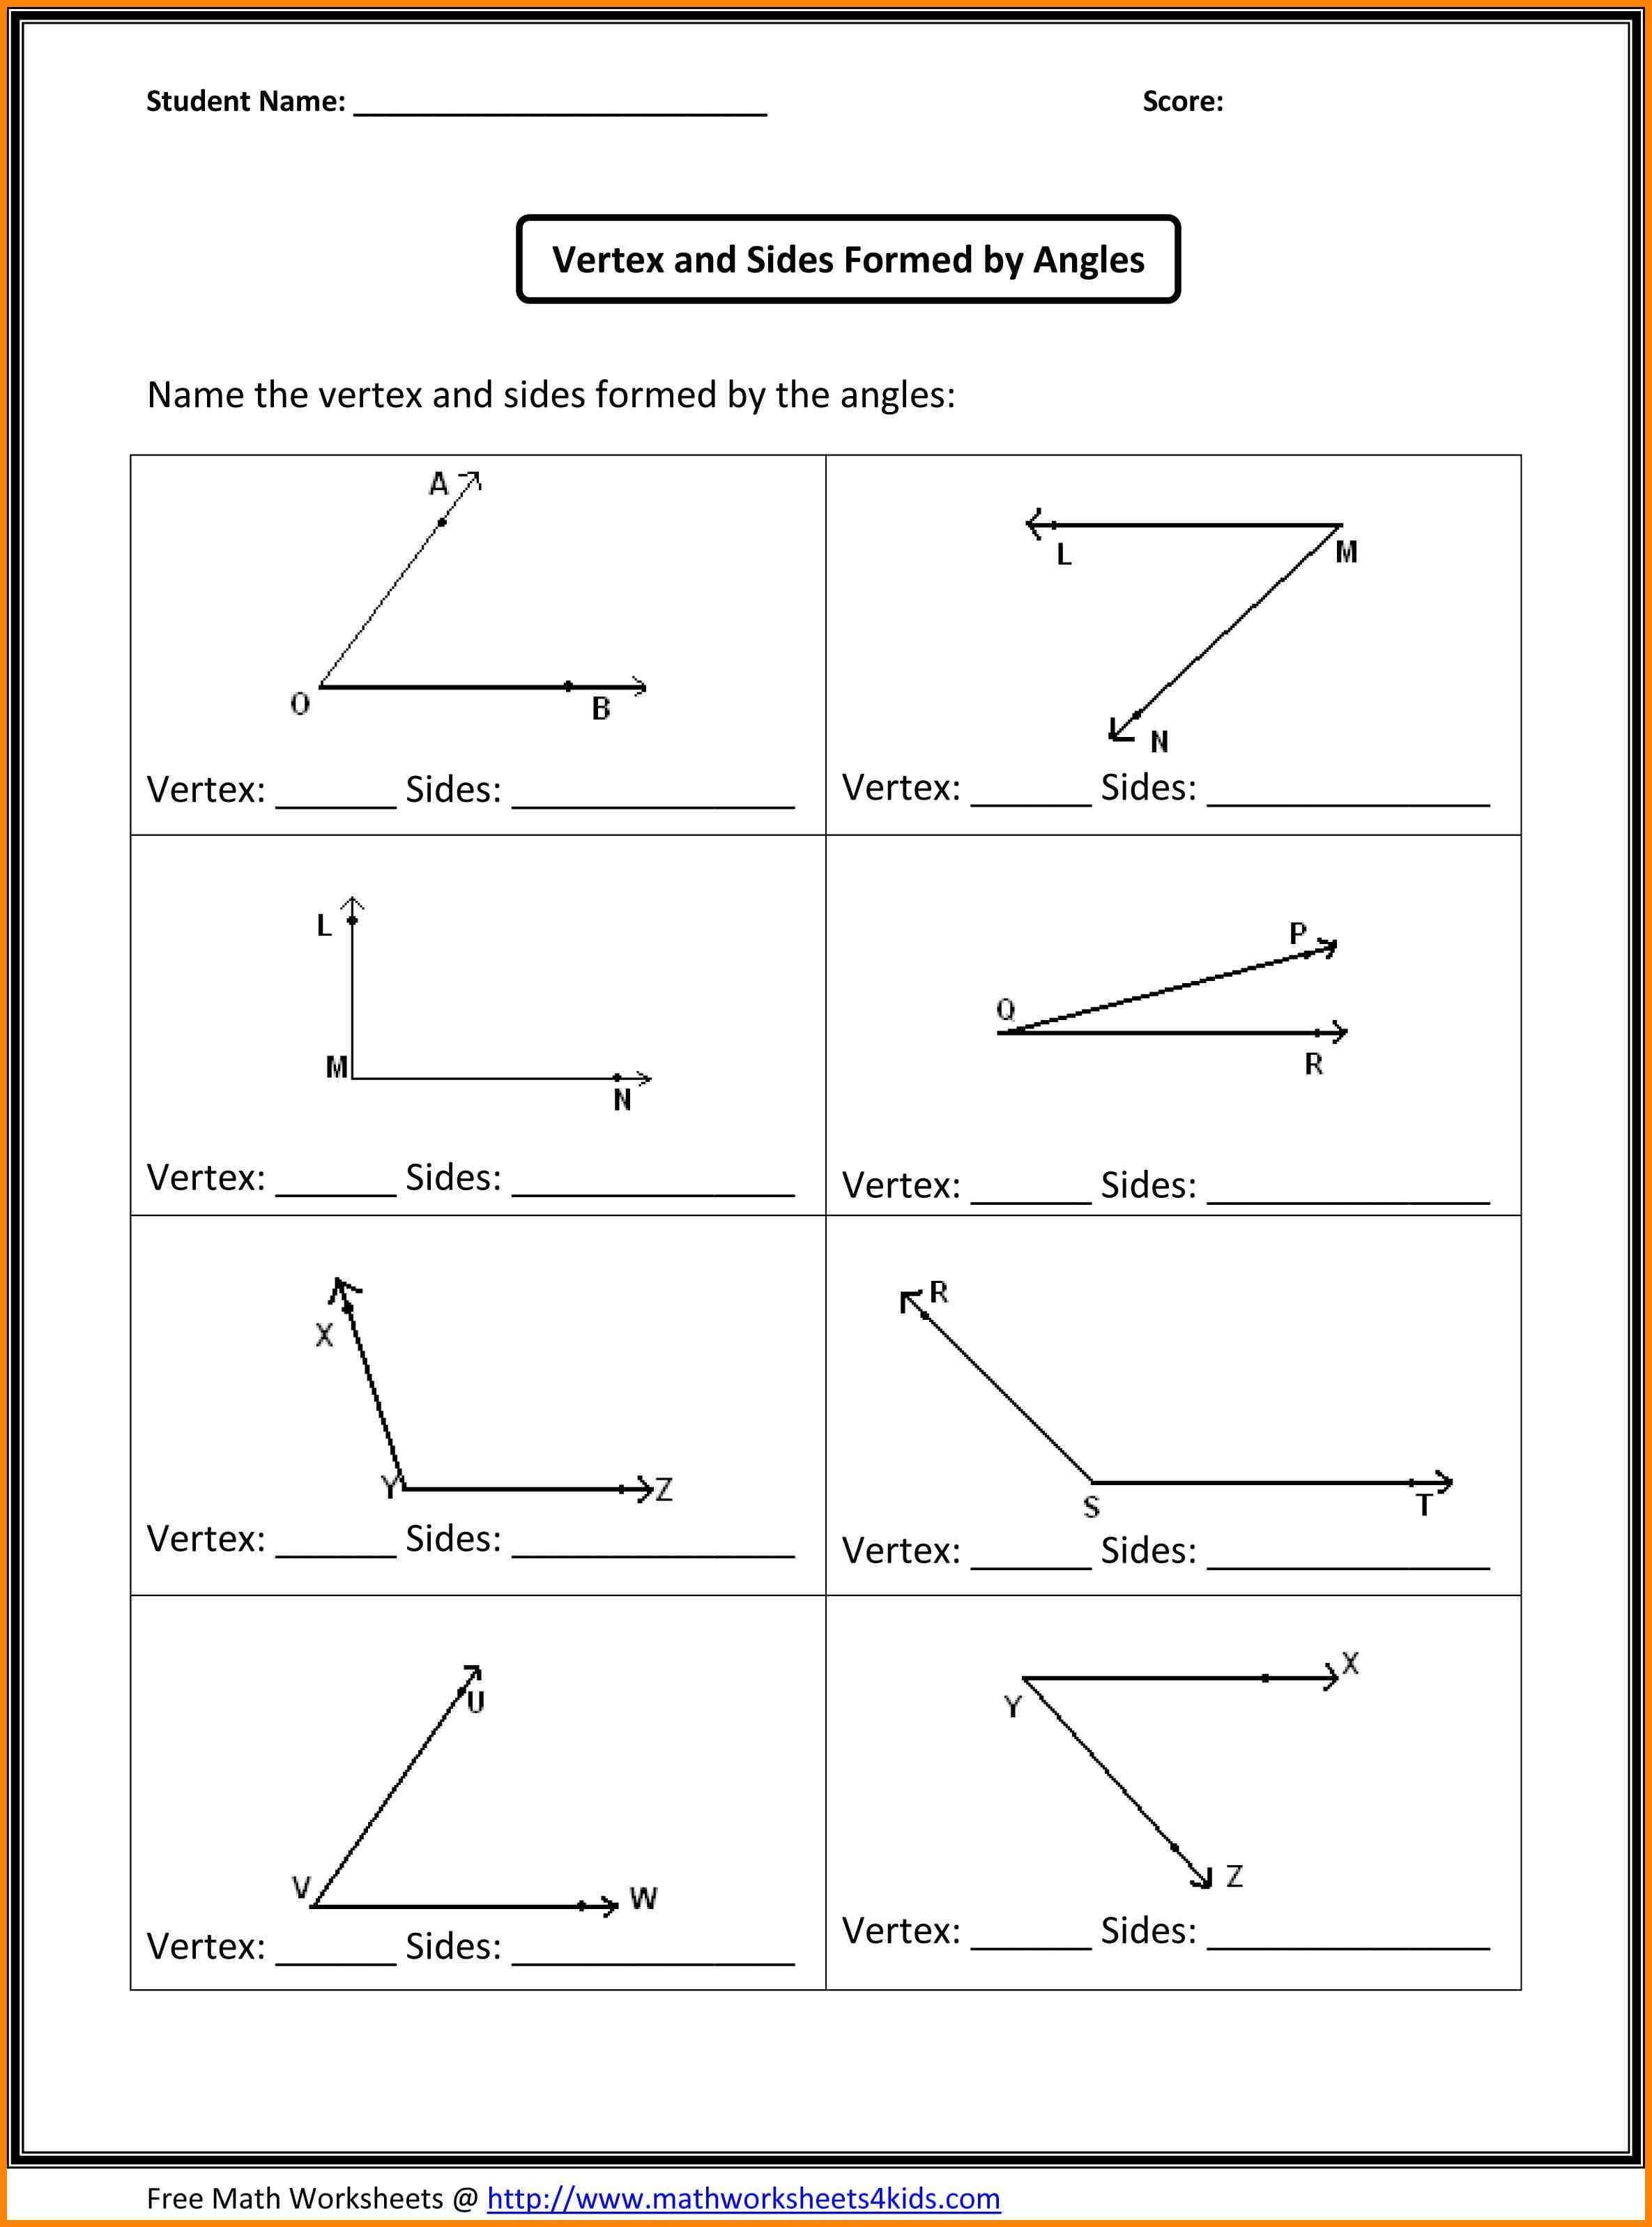 Learning Zonexpress Worksheet Answers together with Learning Zonexpress Worksheet Answers Fresh 18 Best 5 Minute